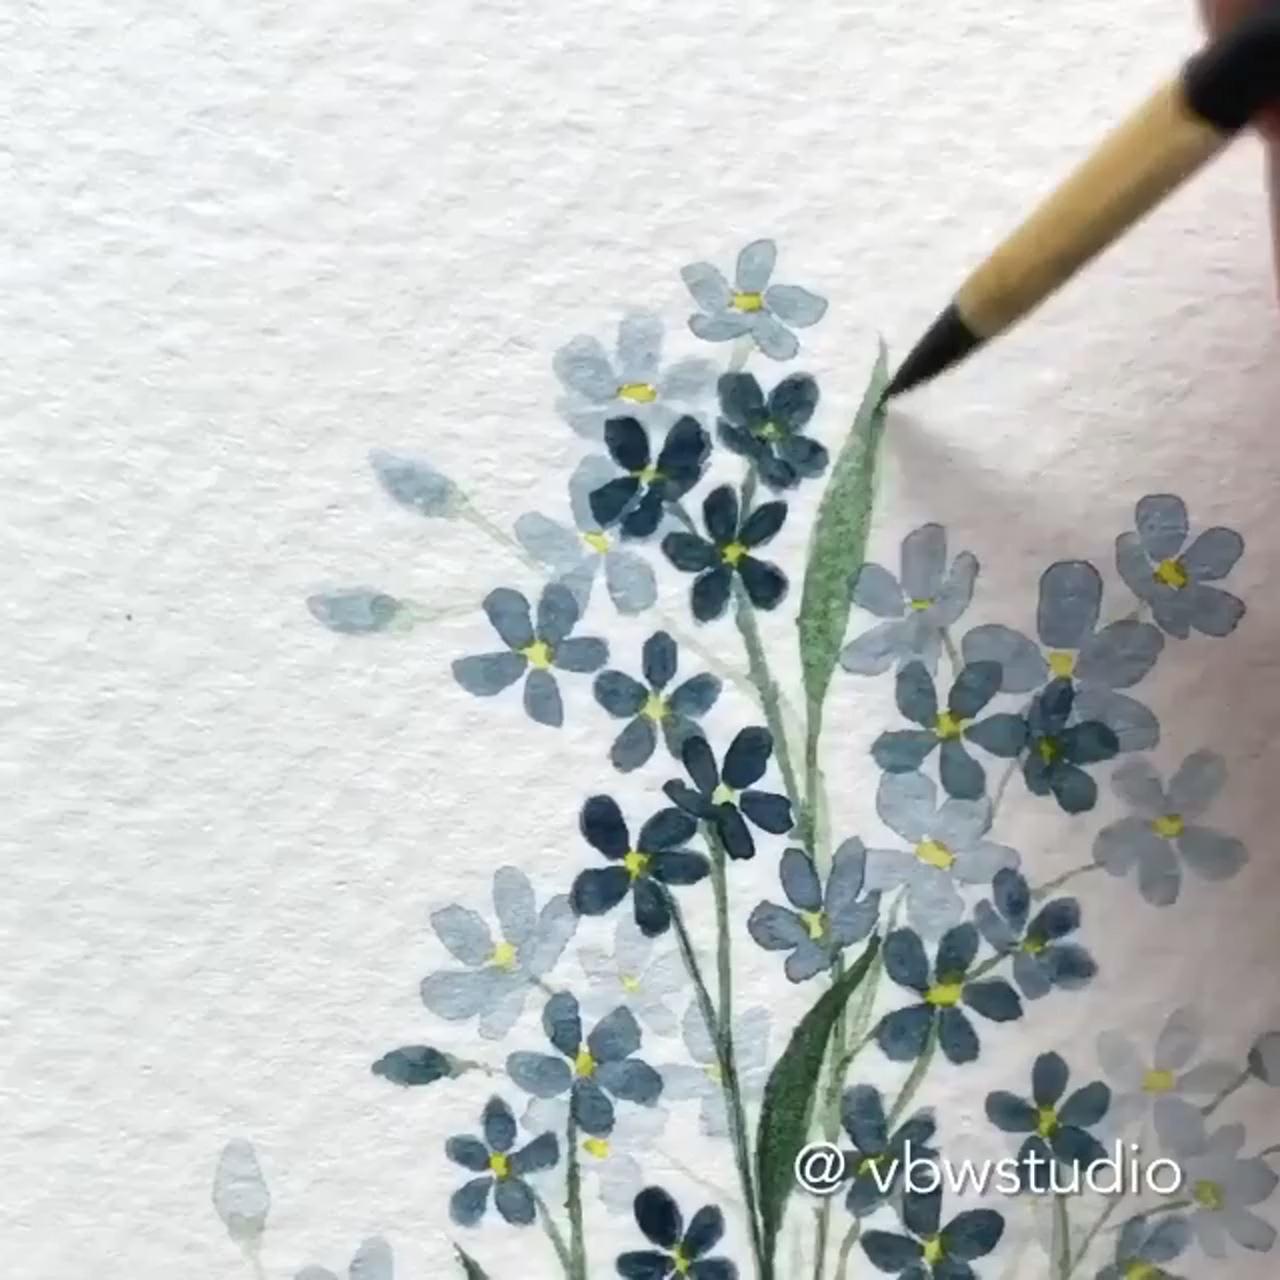 Beginner watercolor tutorial: how to paint a painting with watercolors; watercolor flowers tutorial